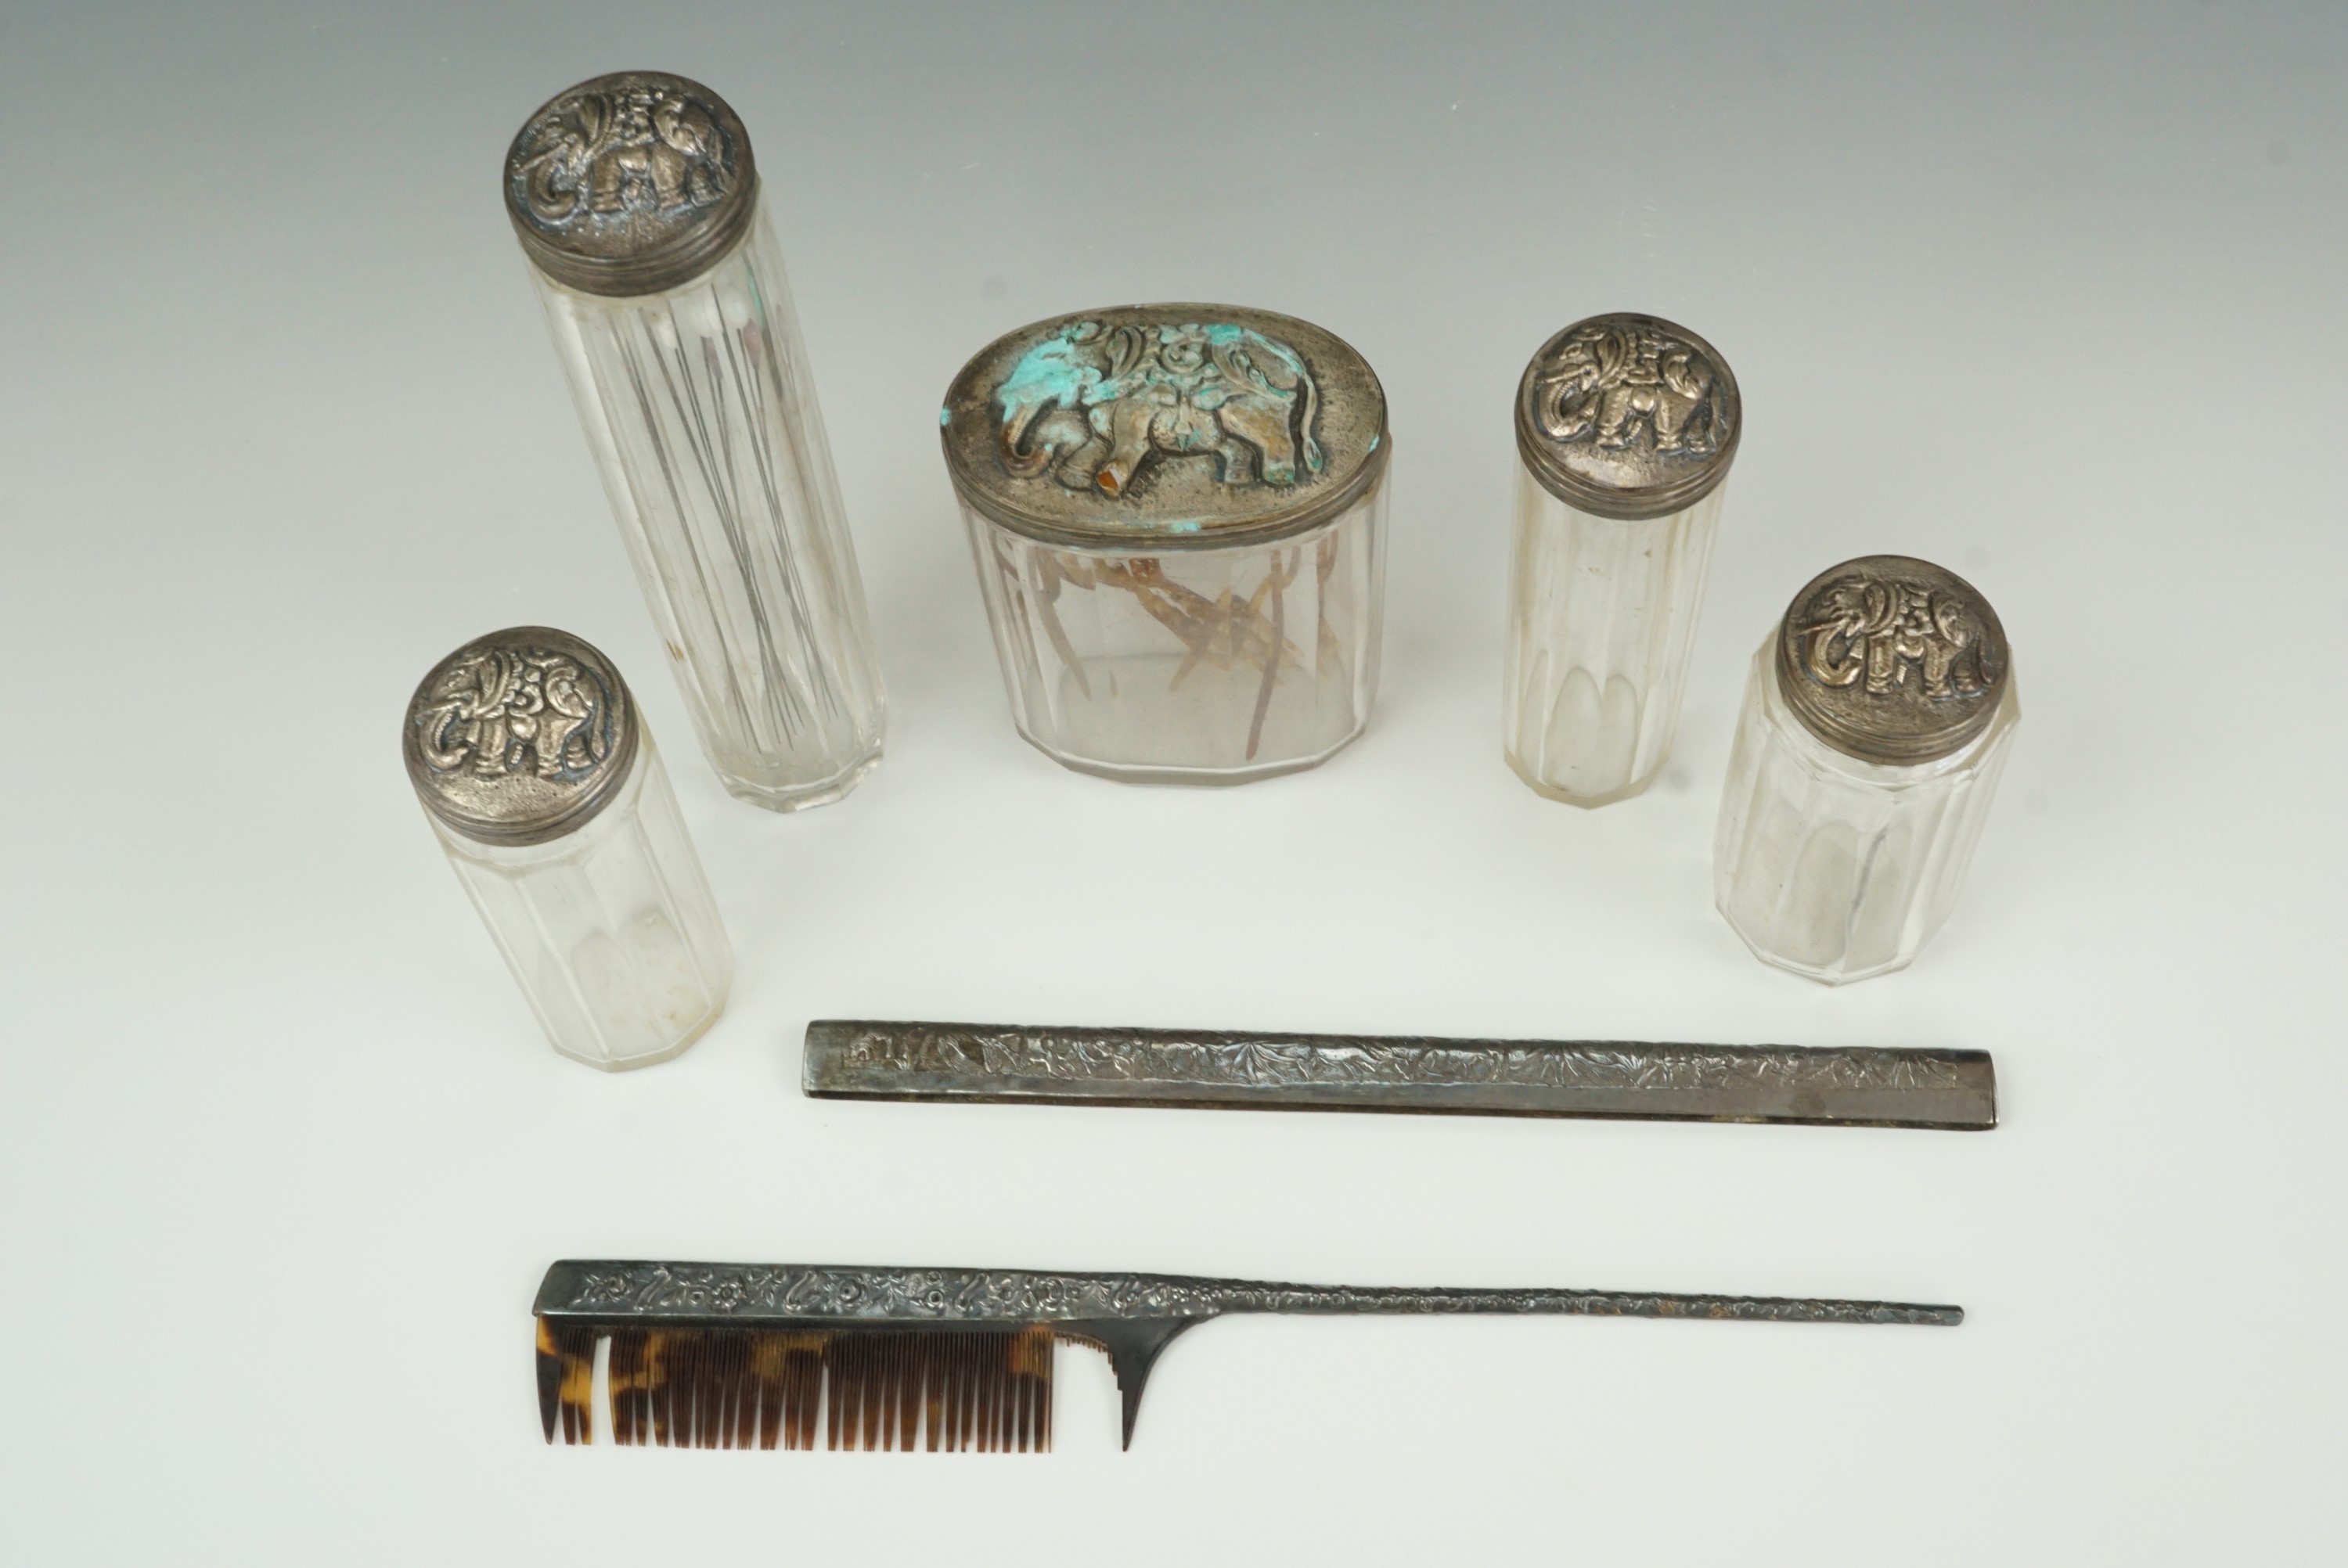 A group of Victorian cut glass toiletry jars, their white metal lids decorated in depiction of